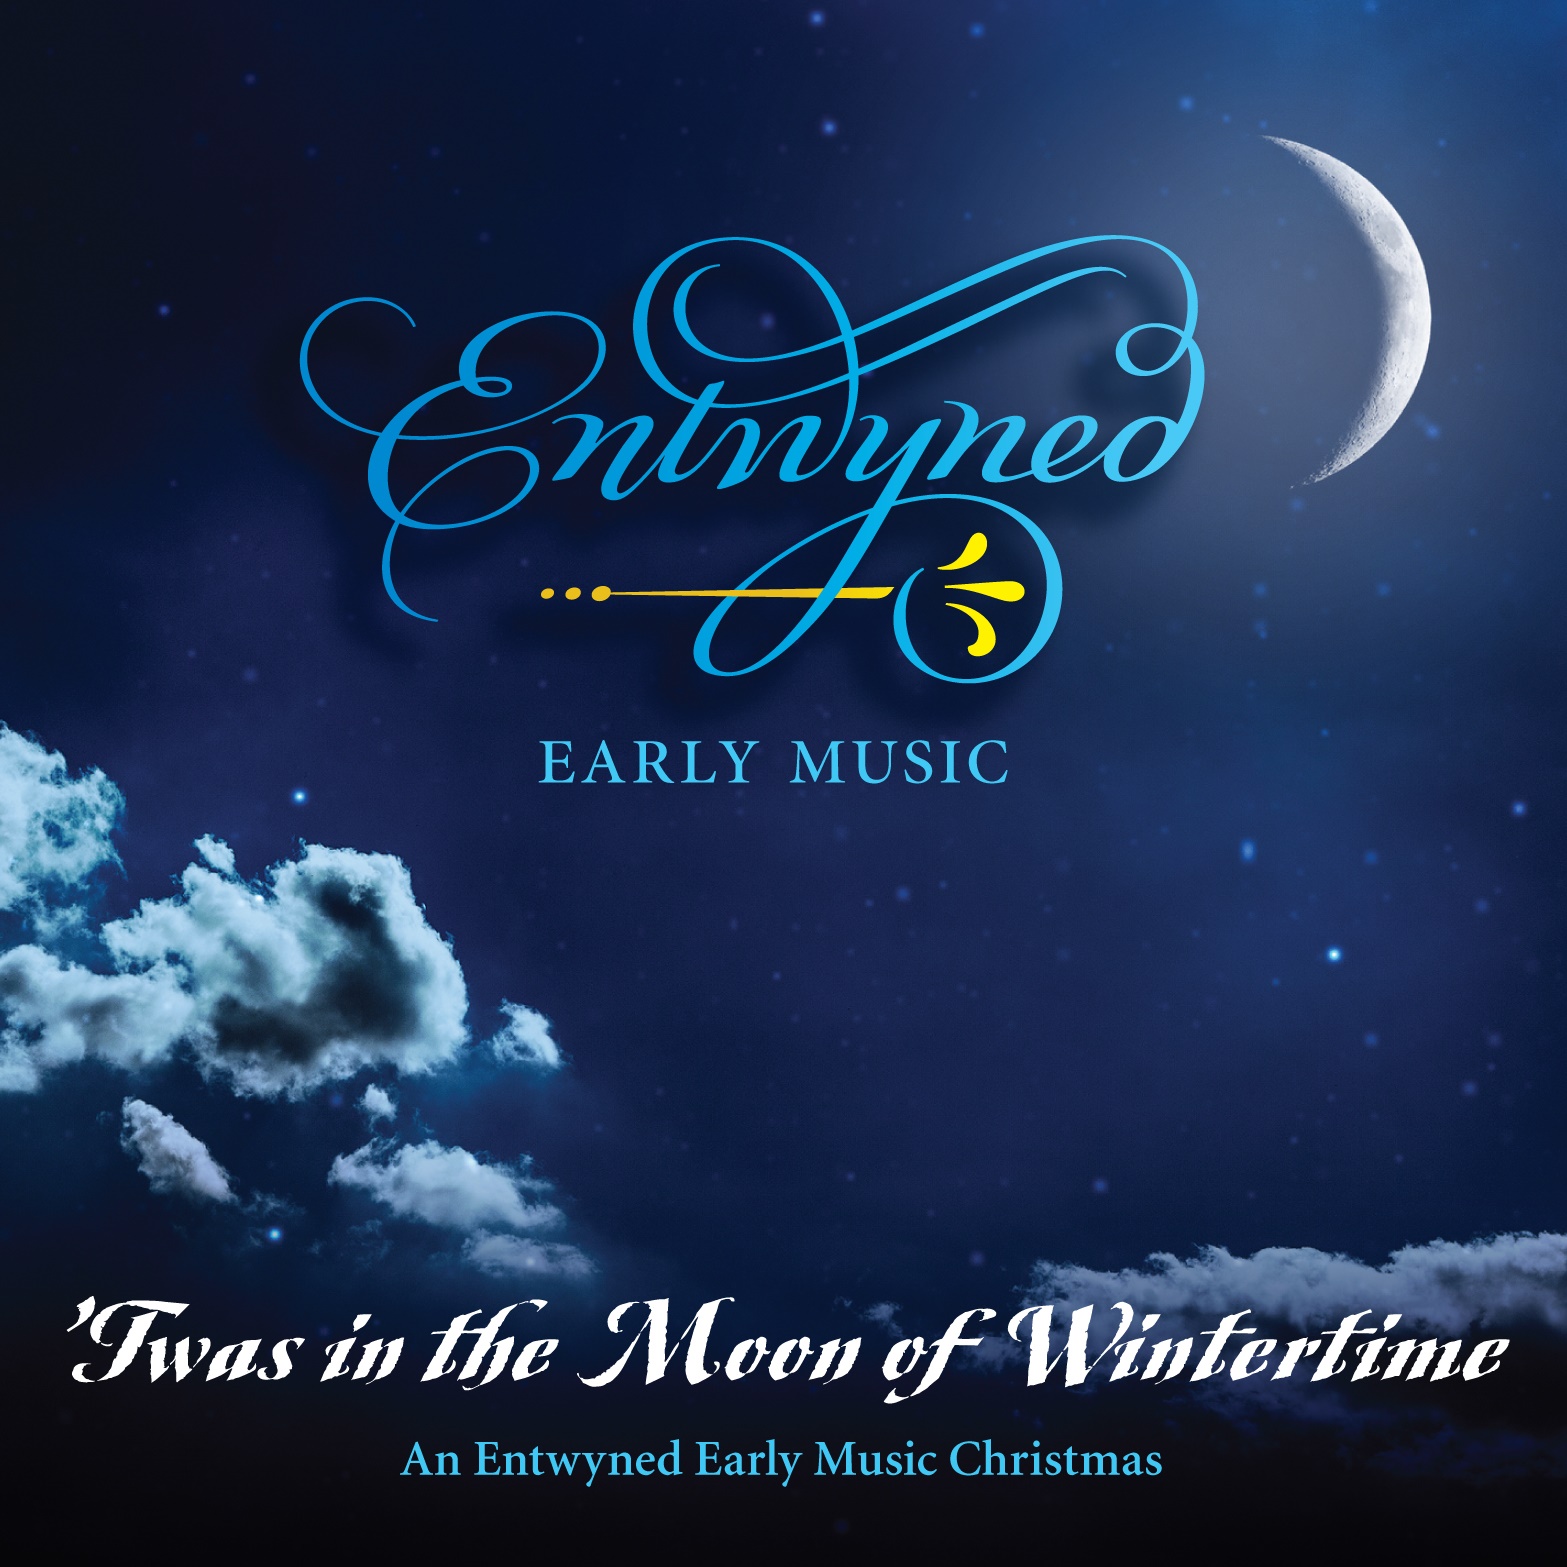 'Twas in the Moon of Wintertime: An Entwyned Early Music Christmas